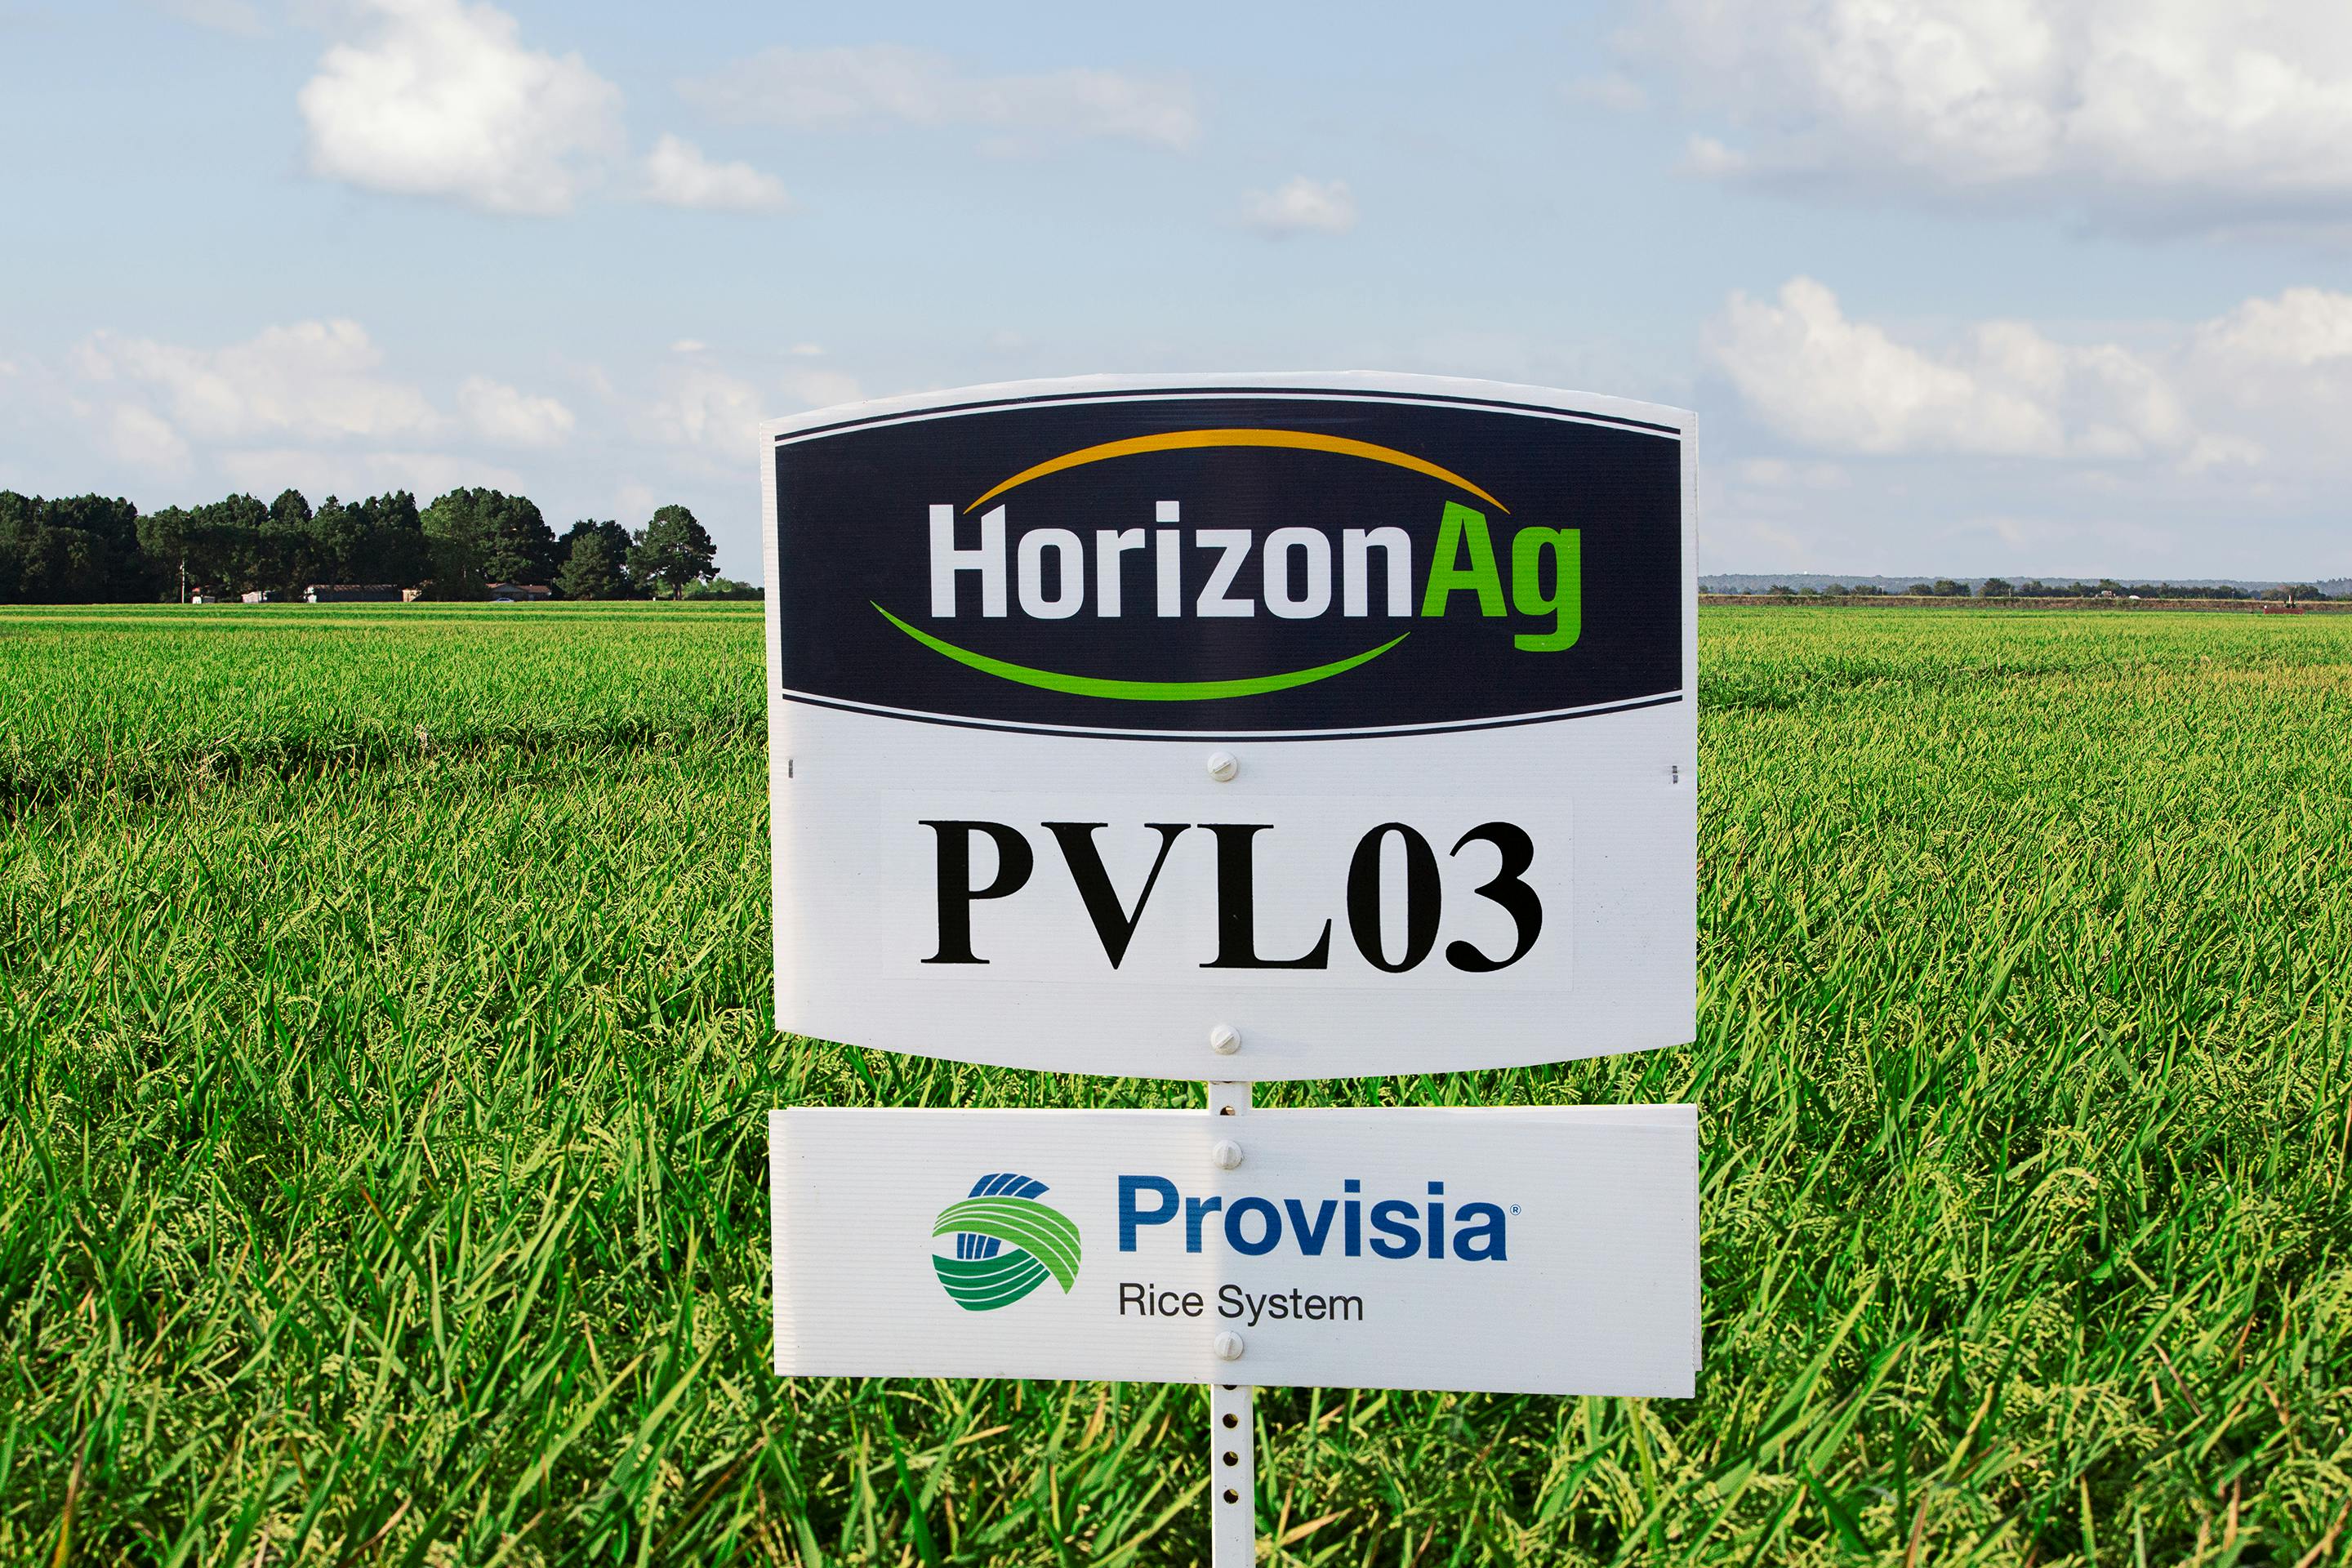 New Horizon Ag Provisia rice variety PVL03 provides higher yield potential, excellent milling quality and outstanding resistance to blast and Cercospora